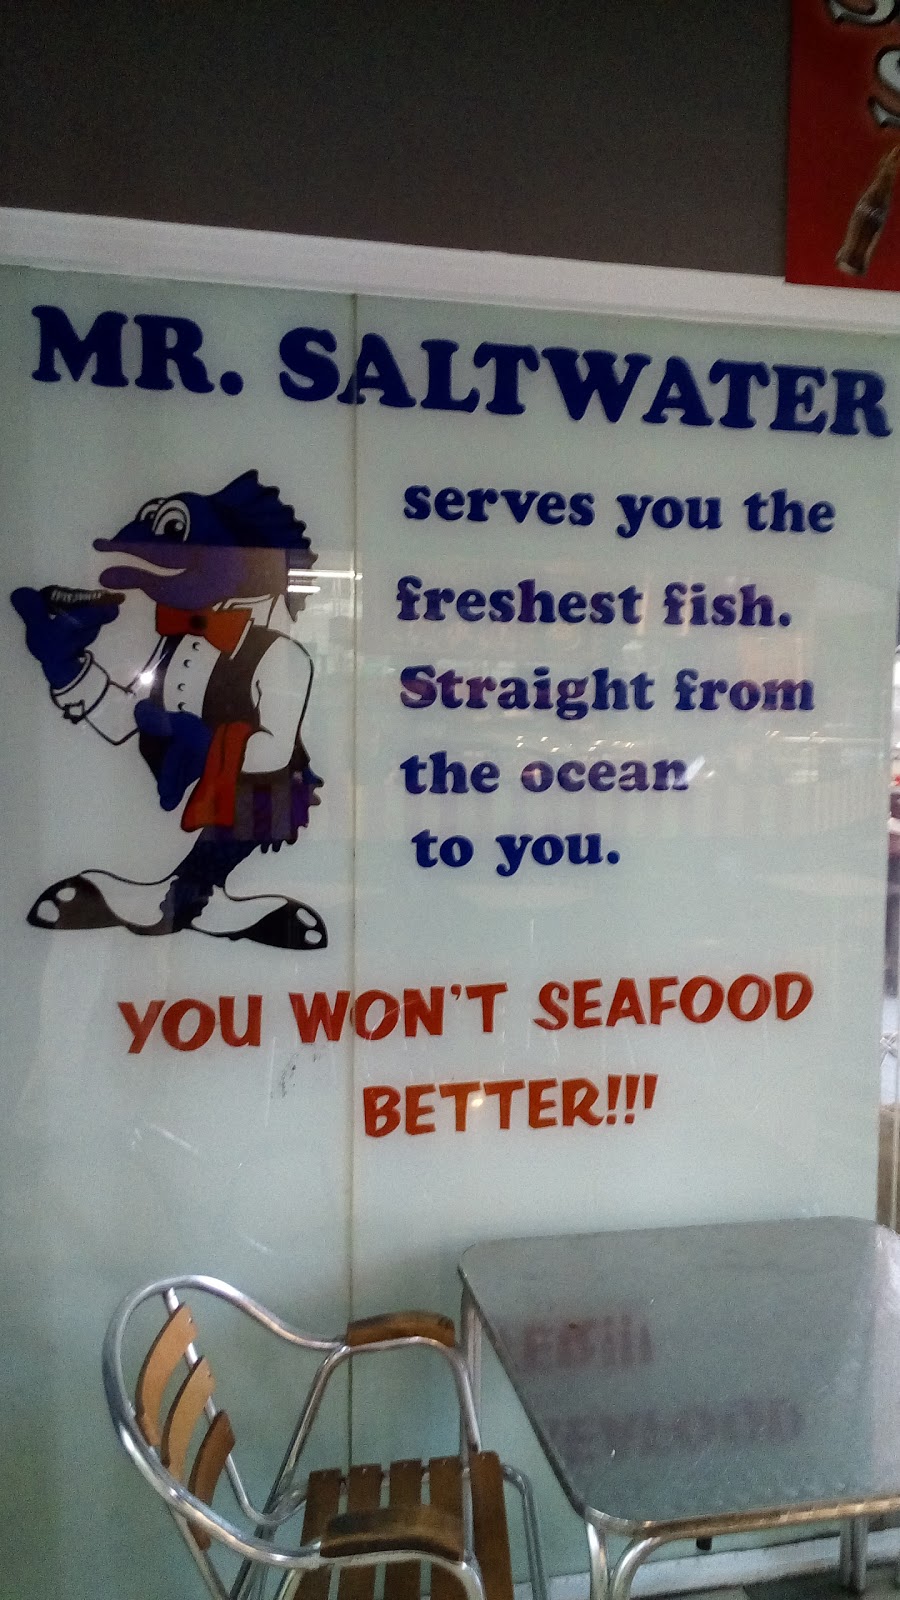 Saltwater Seafoods | meal takeaway | 1380 Pacific Hwy, Turramurra NSW 2074, Australia | 0294492766 OR +61 2 9449 2766